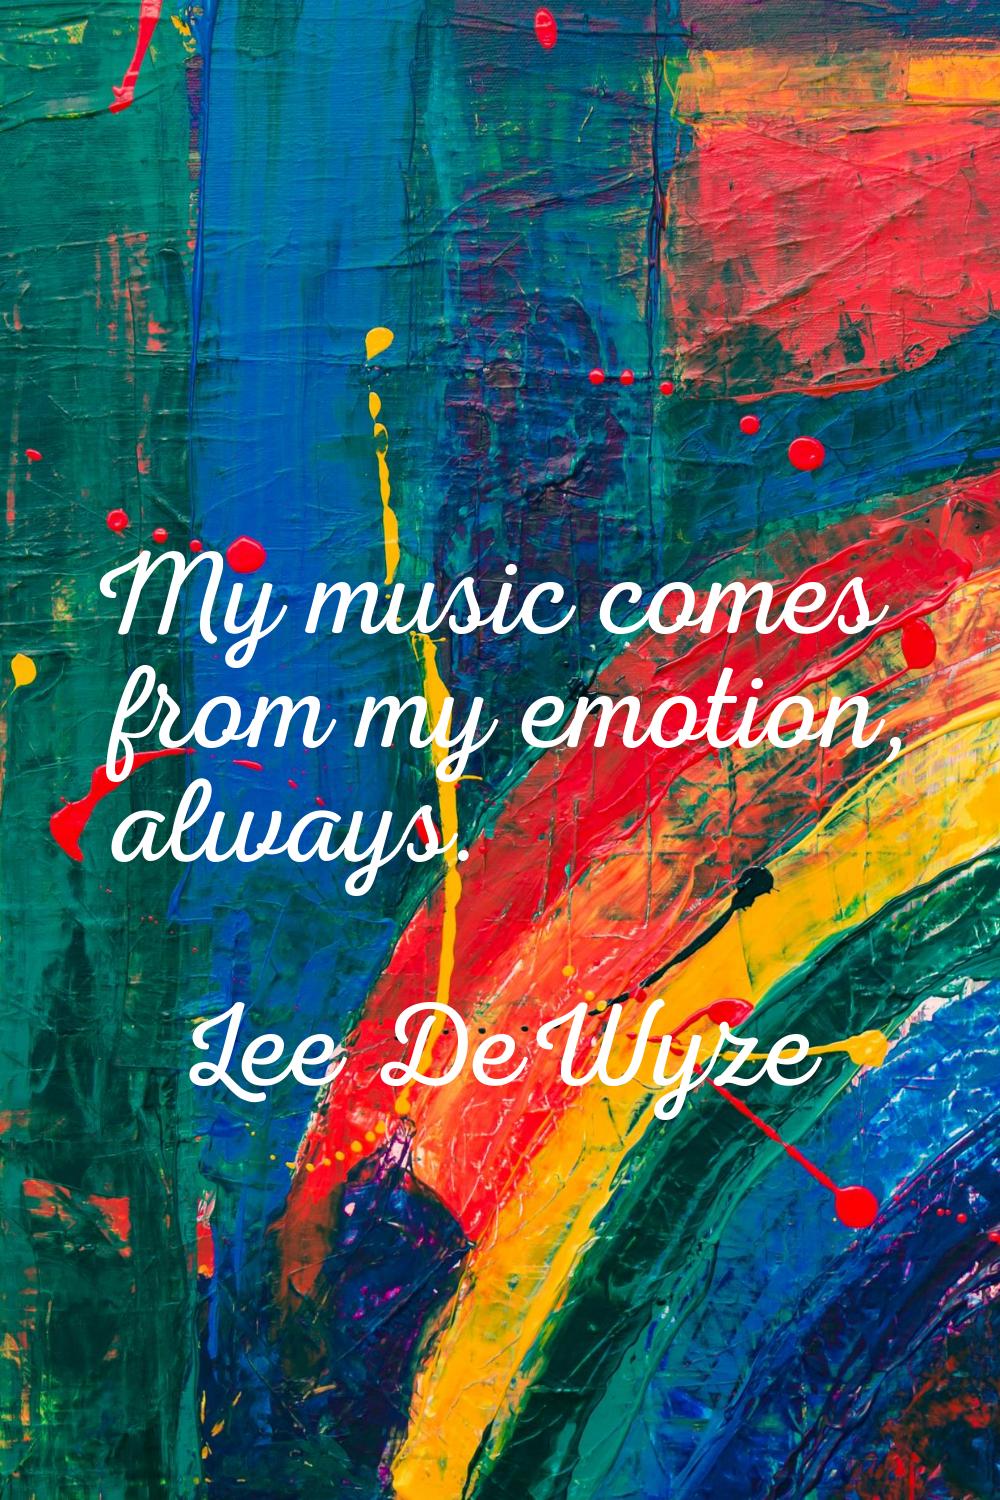 My music comes from my emotion, always.